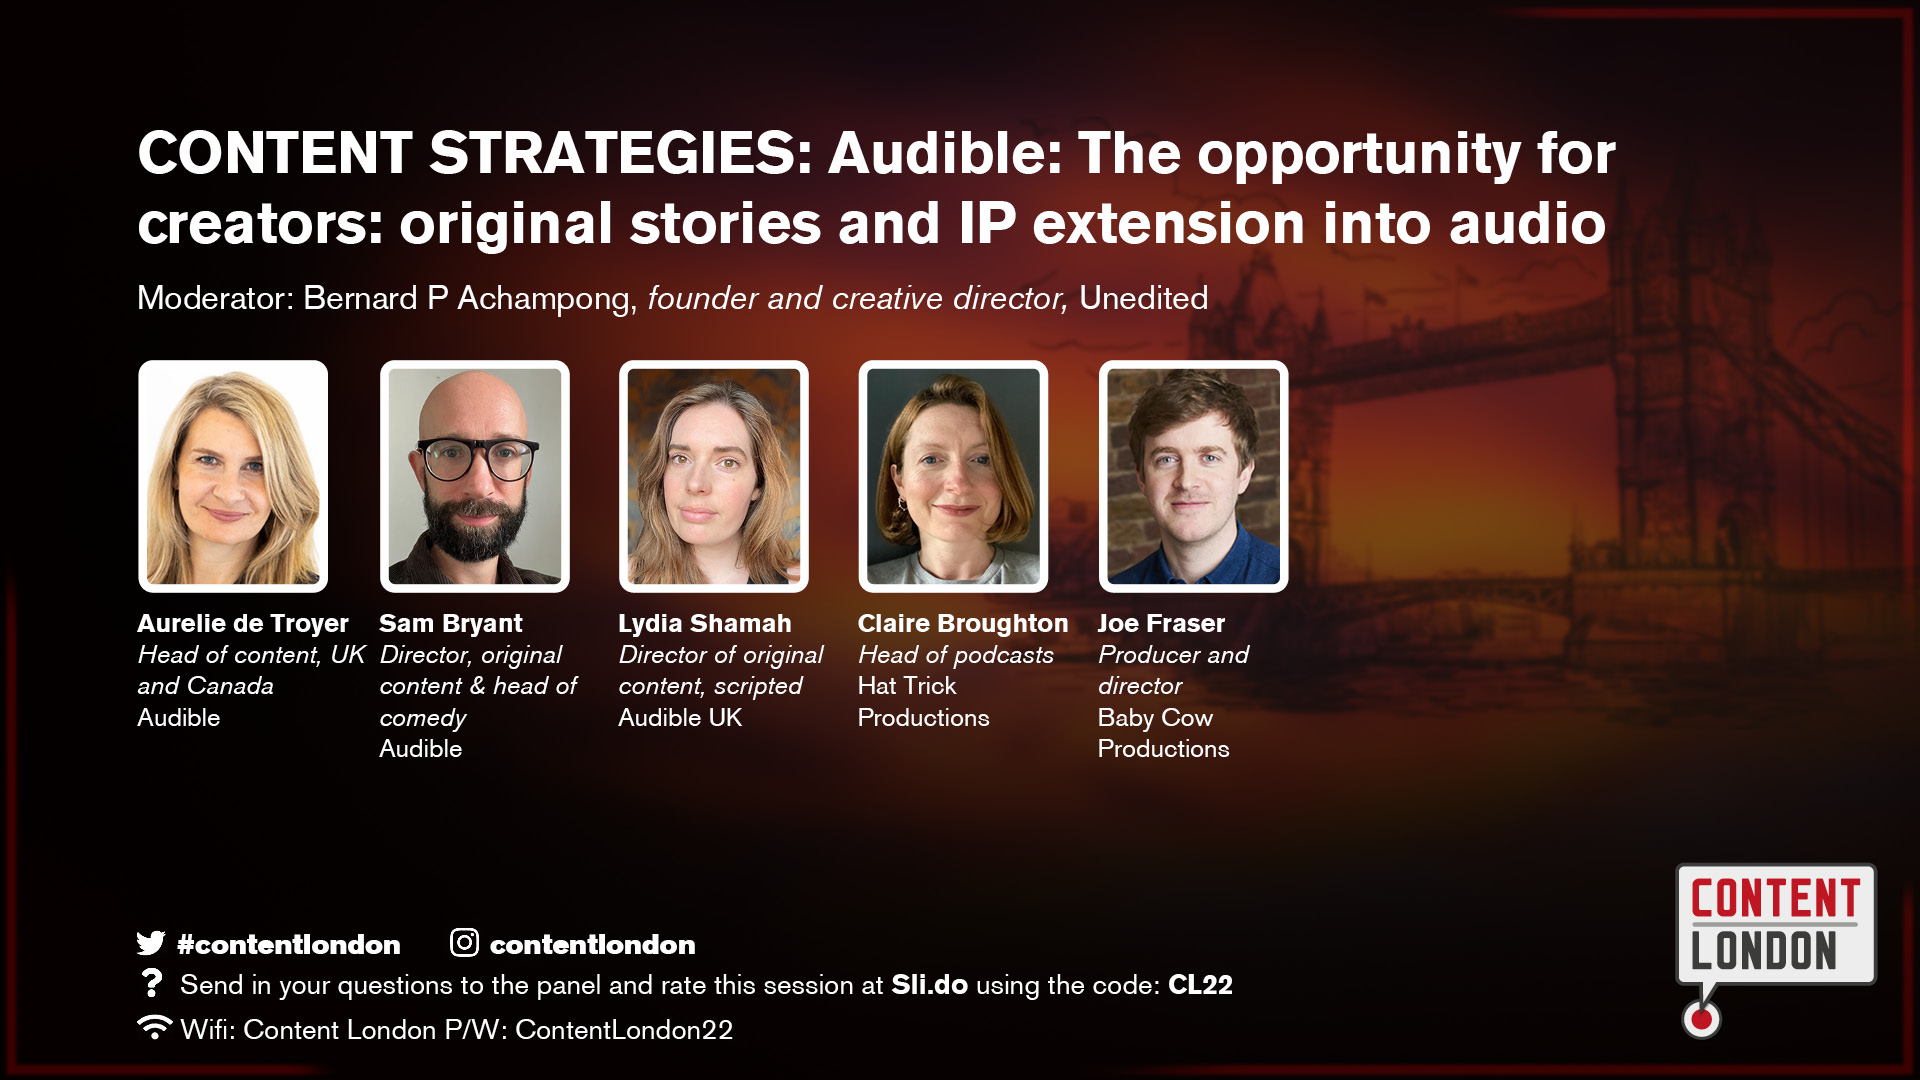 CONTENT STRATEGIES: Audible: The opportunity for creators: original stories and IP extension into audio